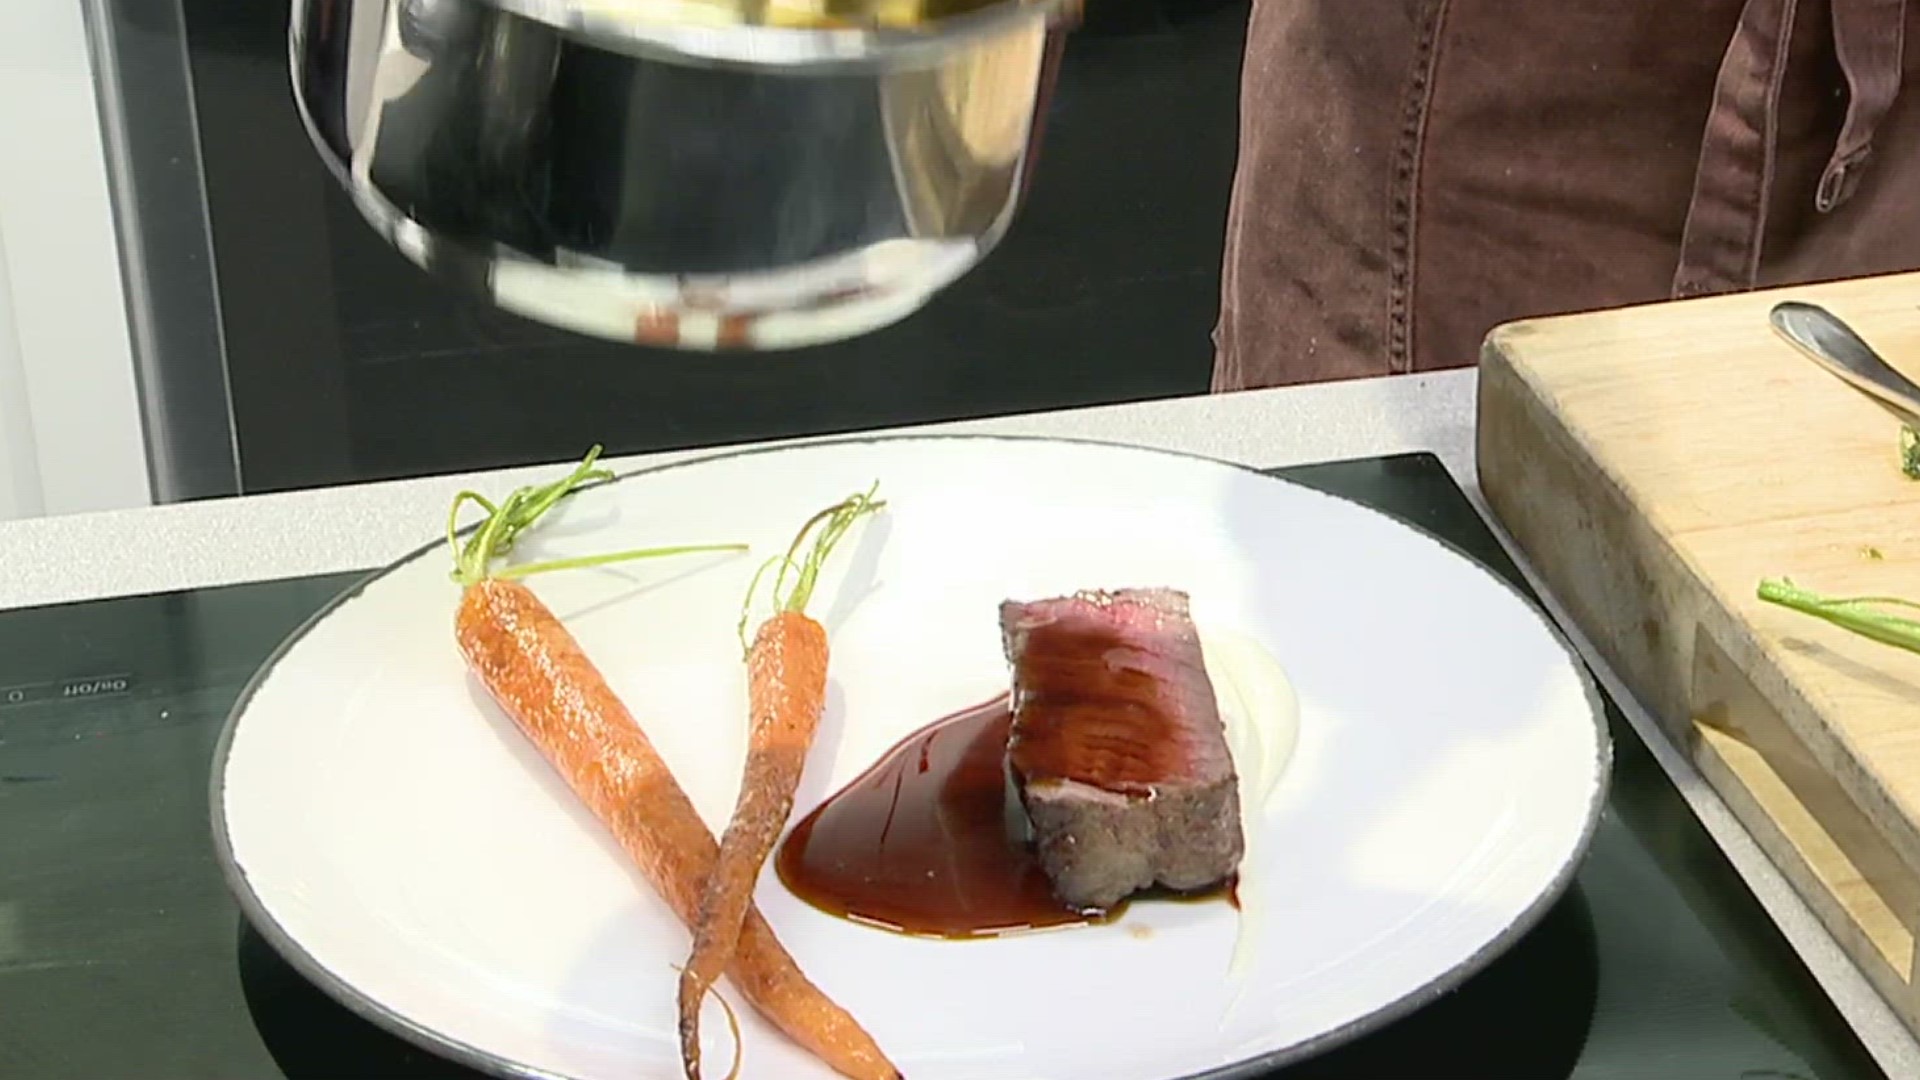 Chef Josh from The Pressroom cooked up a top sirloin to show off the eatery's summer menu.